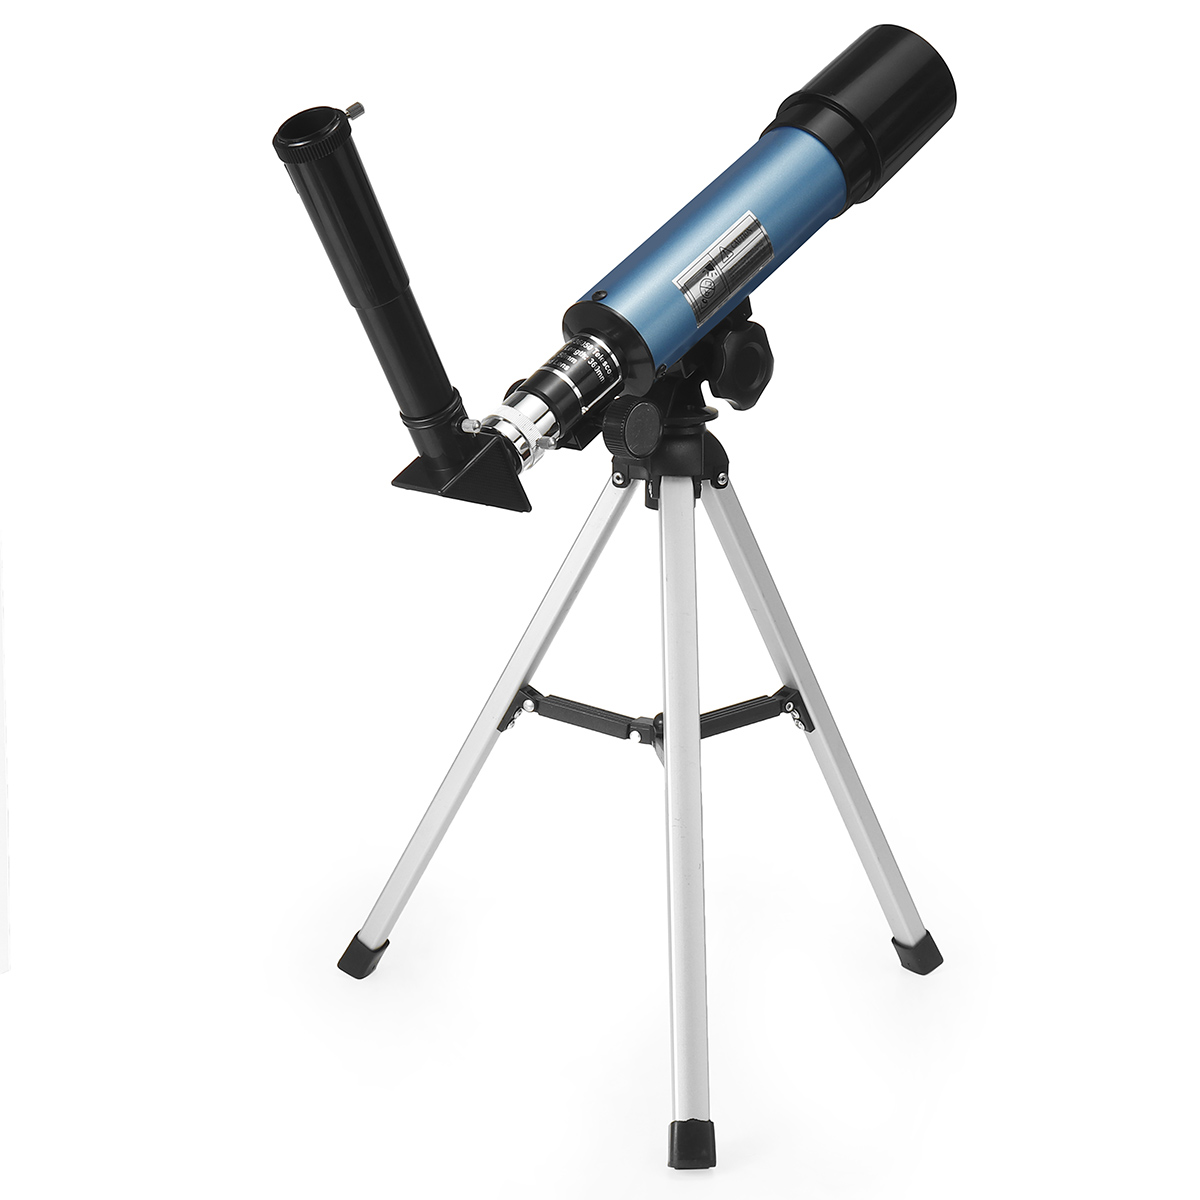 90x-Magnification-Astronomical-Telescope-Clear-Image-with-Remote-Control-and-Camera-Rod-for-Observe--1851121-5